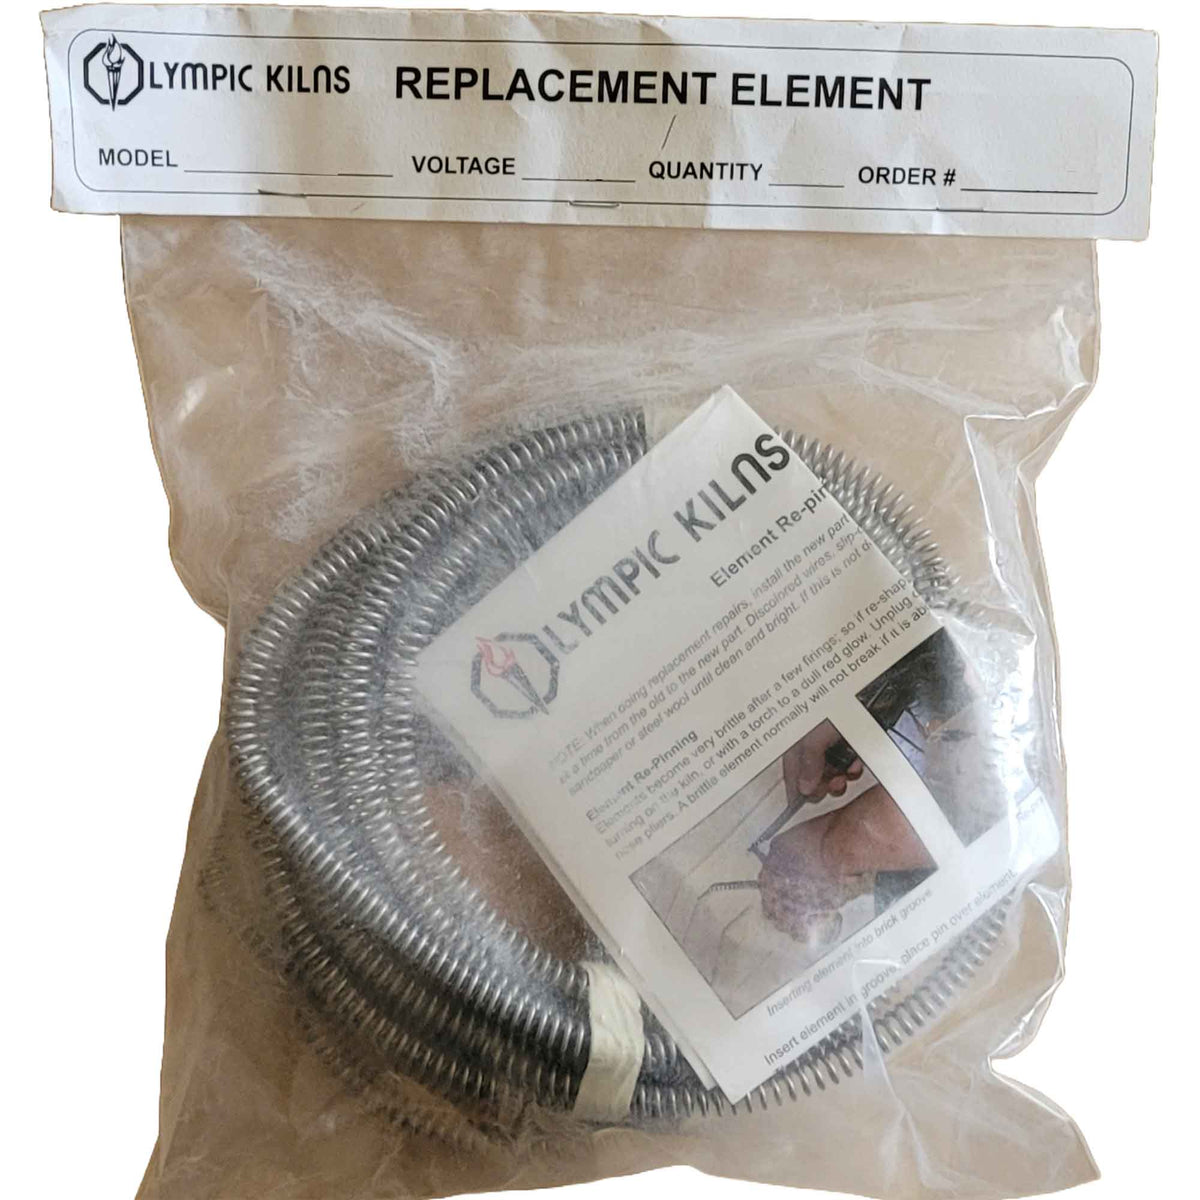 Olympic Kiln Replacement Element for Model 2327 or 2327H